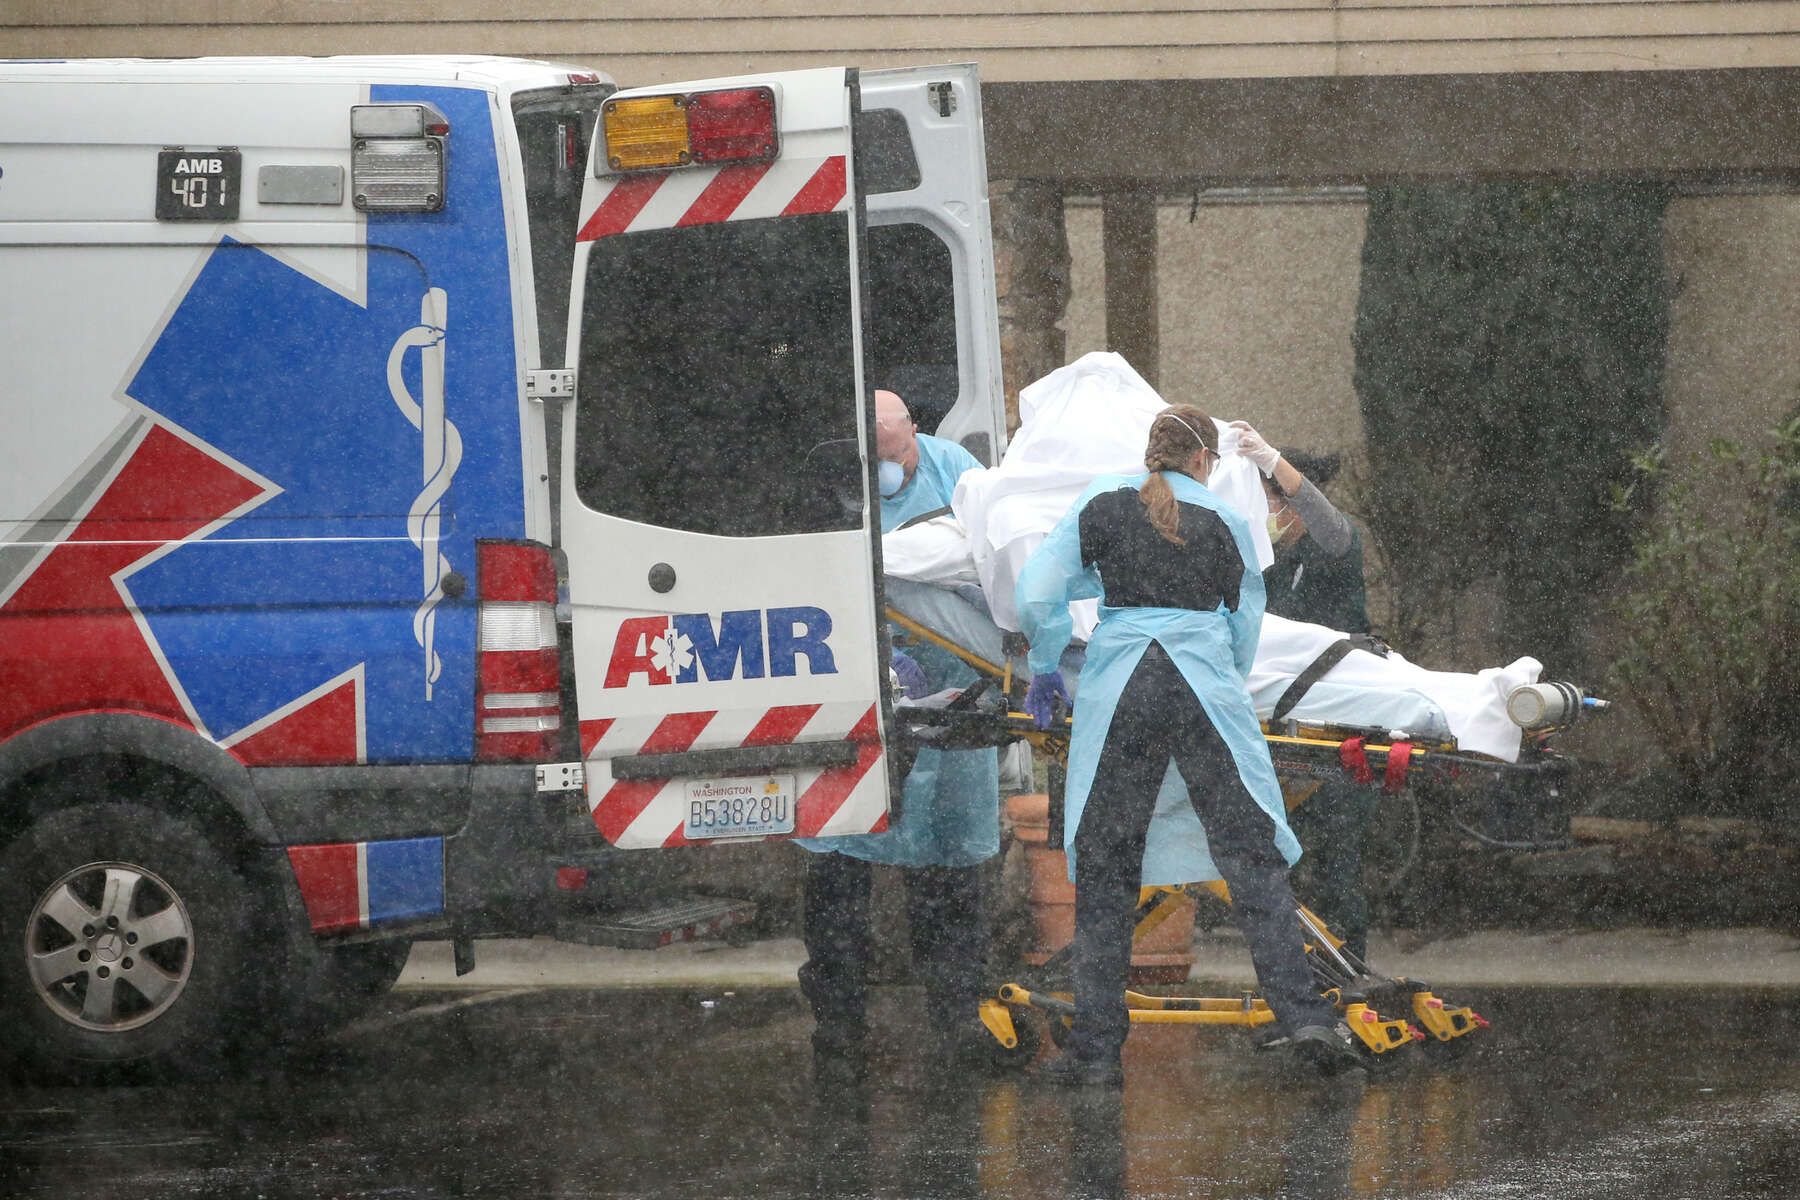 KIRKLAND, WA - MARCH 07: A patient is shielded from the rain as they are put into an ambulance outside the Life Care Center on March 7, 2020 in Kirkland, Washington. Several residents have died from COVID-19 and others have tested positive for the novel coronavirus. (Photo by Karen Ducey/Getty Images)